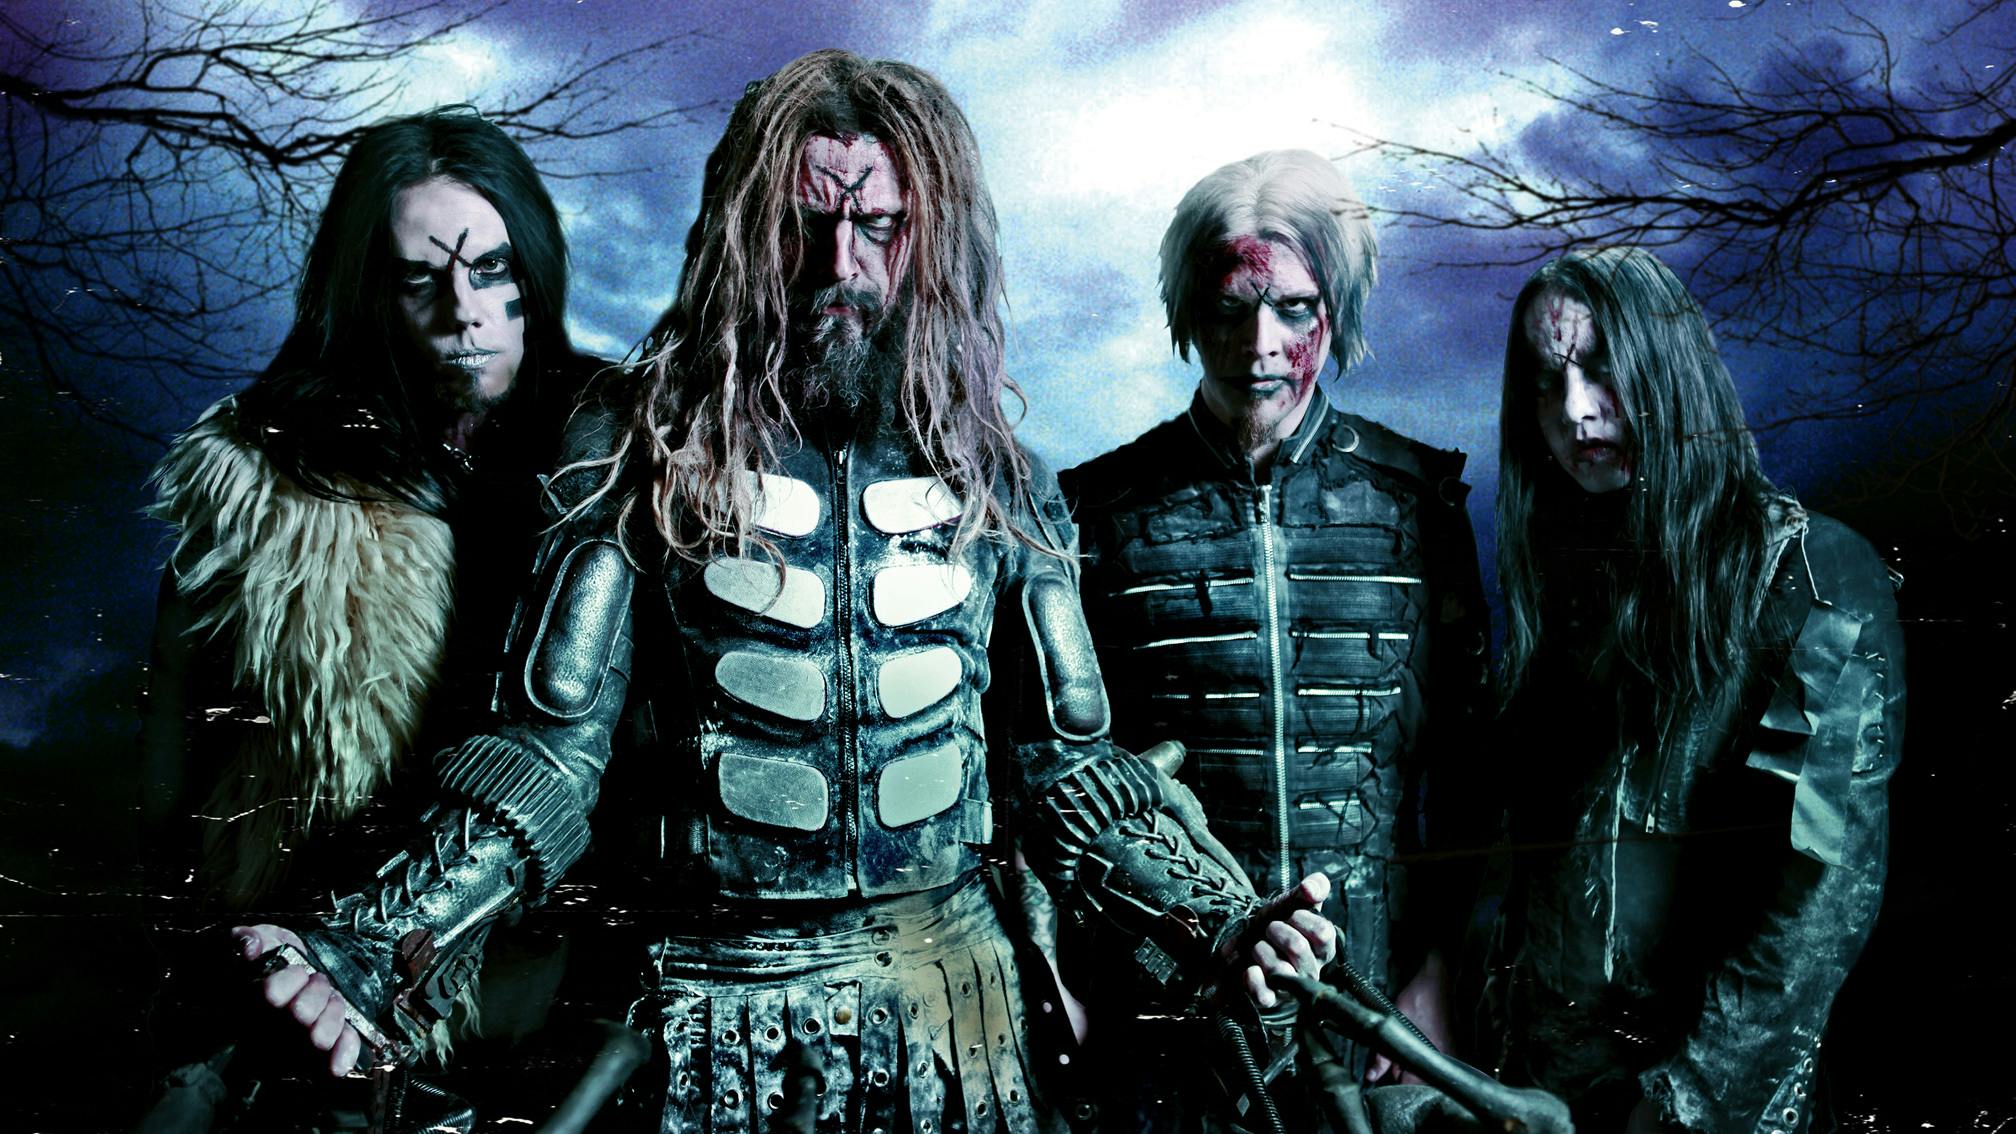 The 20 greatest Rob Zombie songs – ranked